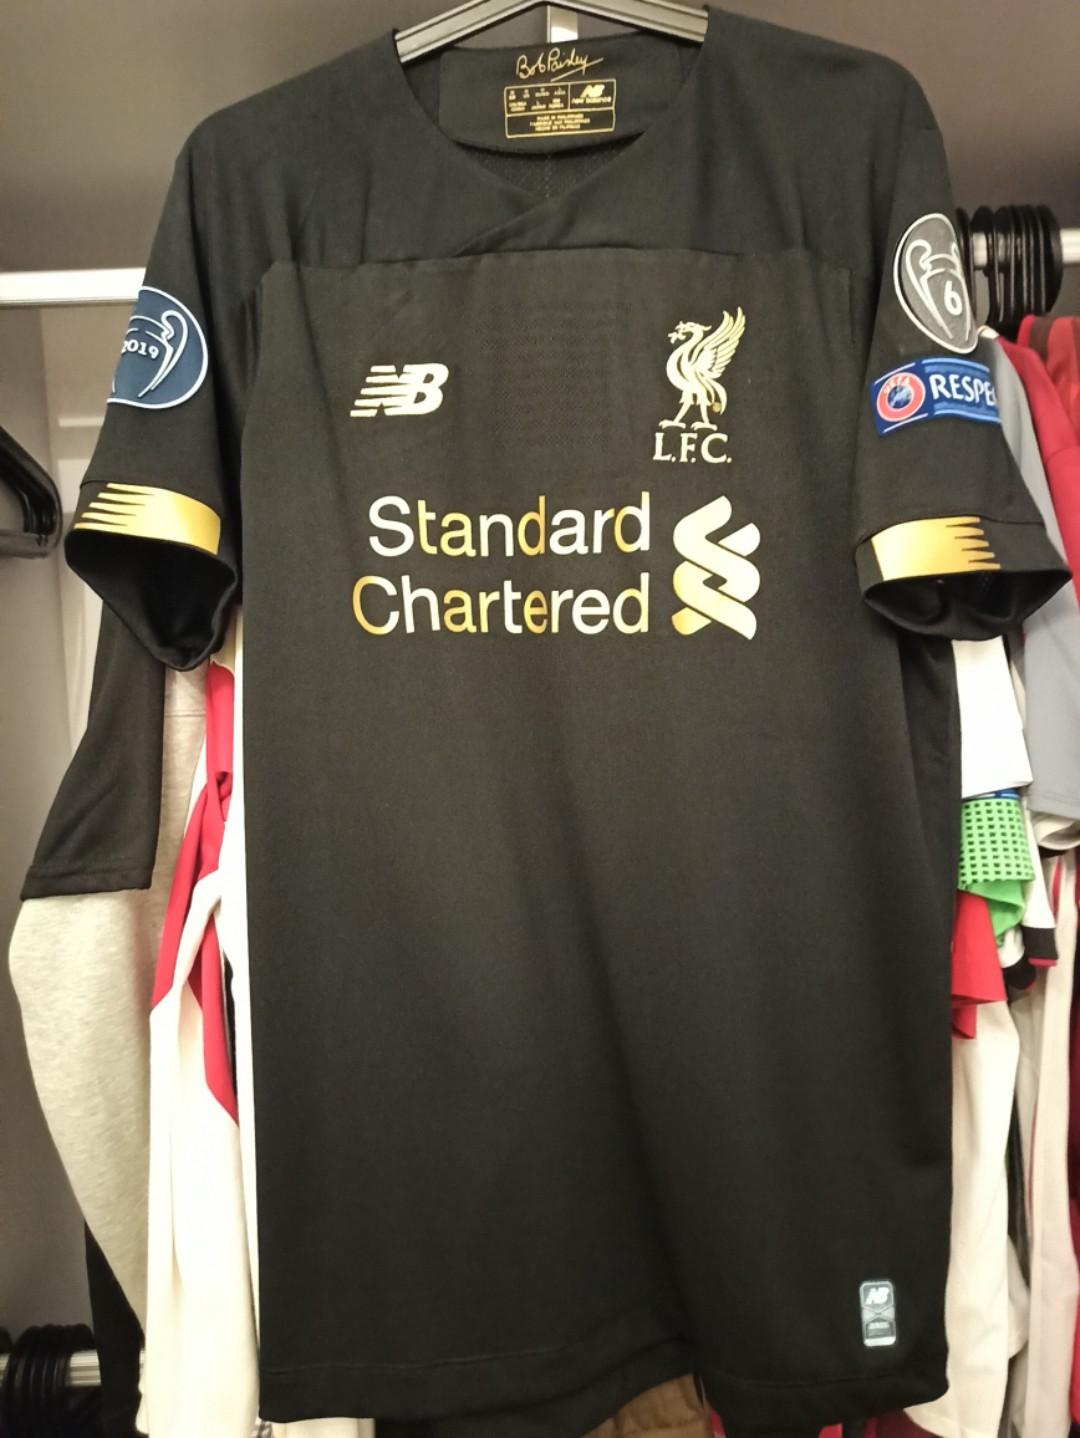 alisson becker jersey for sale